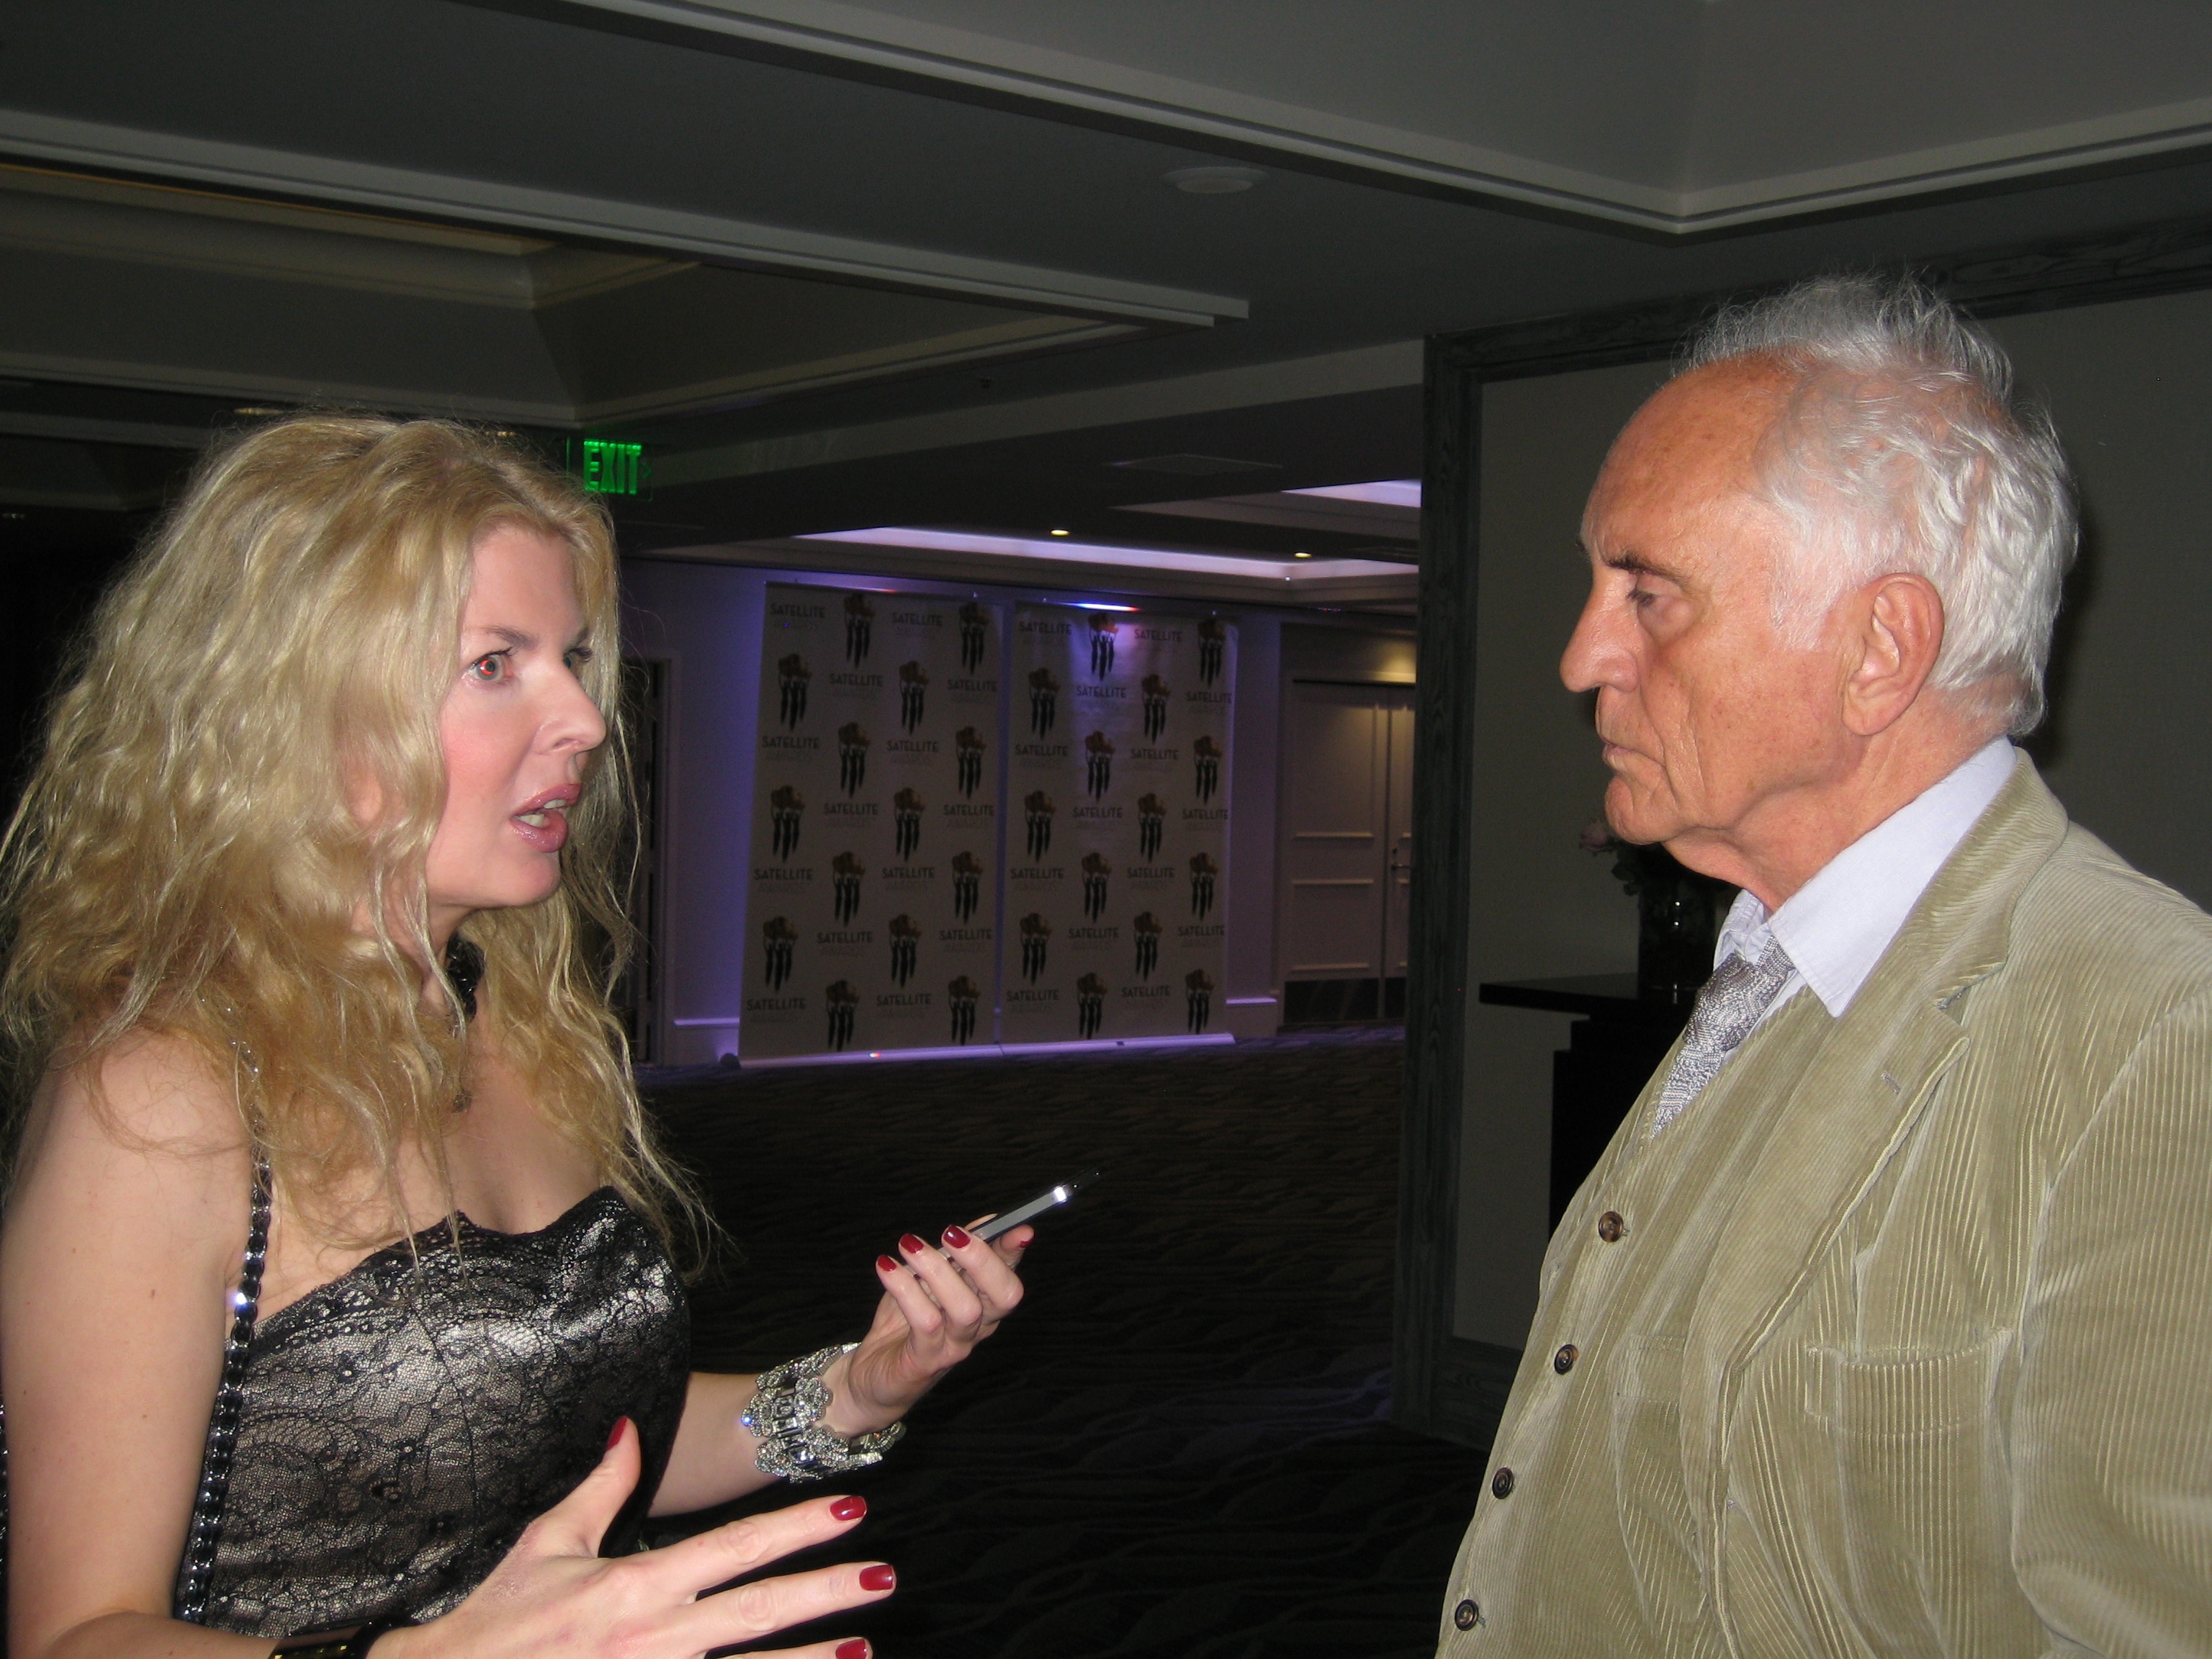 Adrienne Papp of Atlantic Publicity and Terence Stamp at the International Press Academy Awards, 2012, Los Angeles Interview.